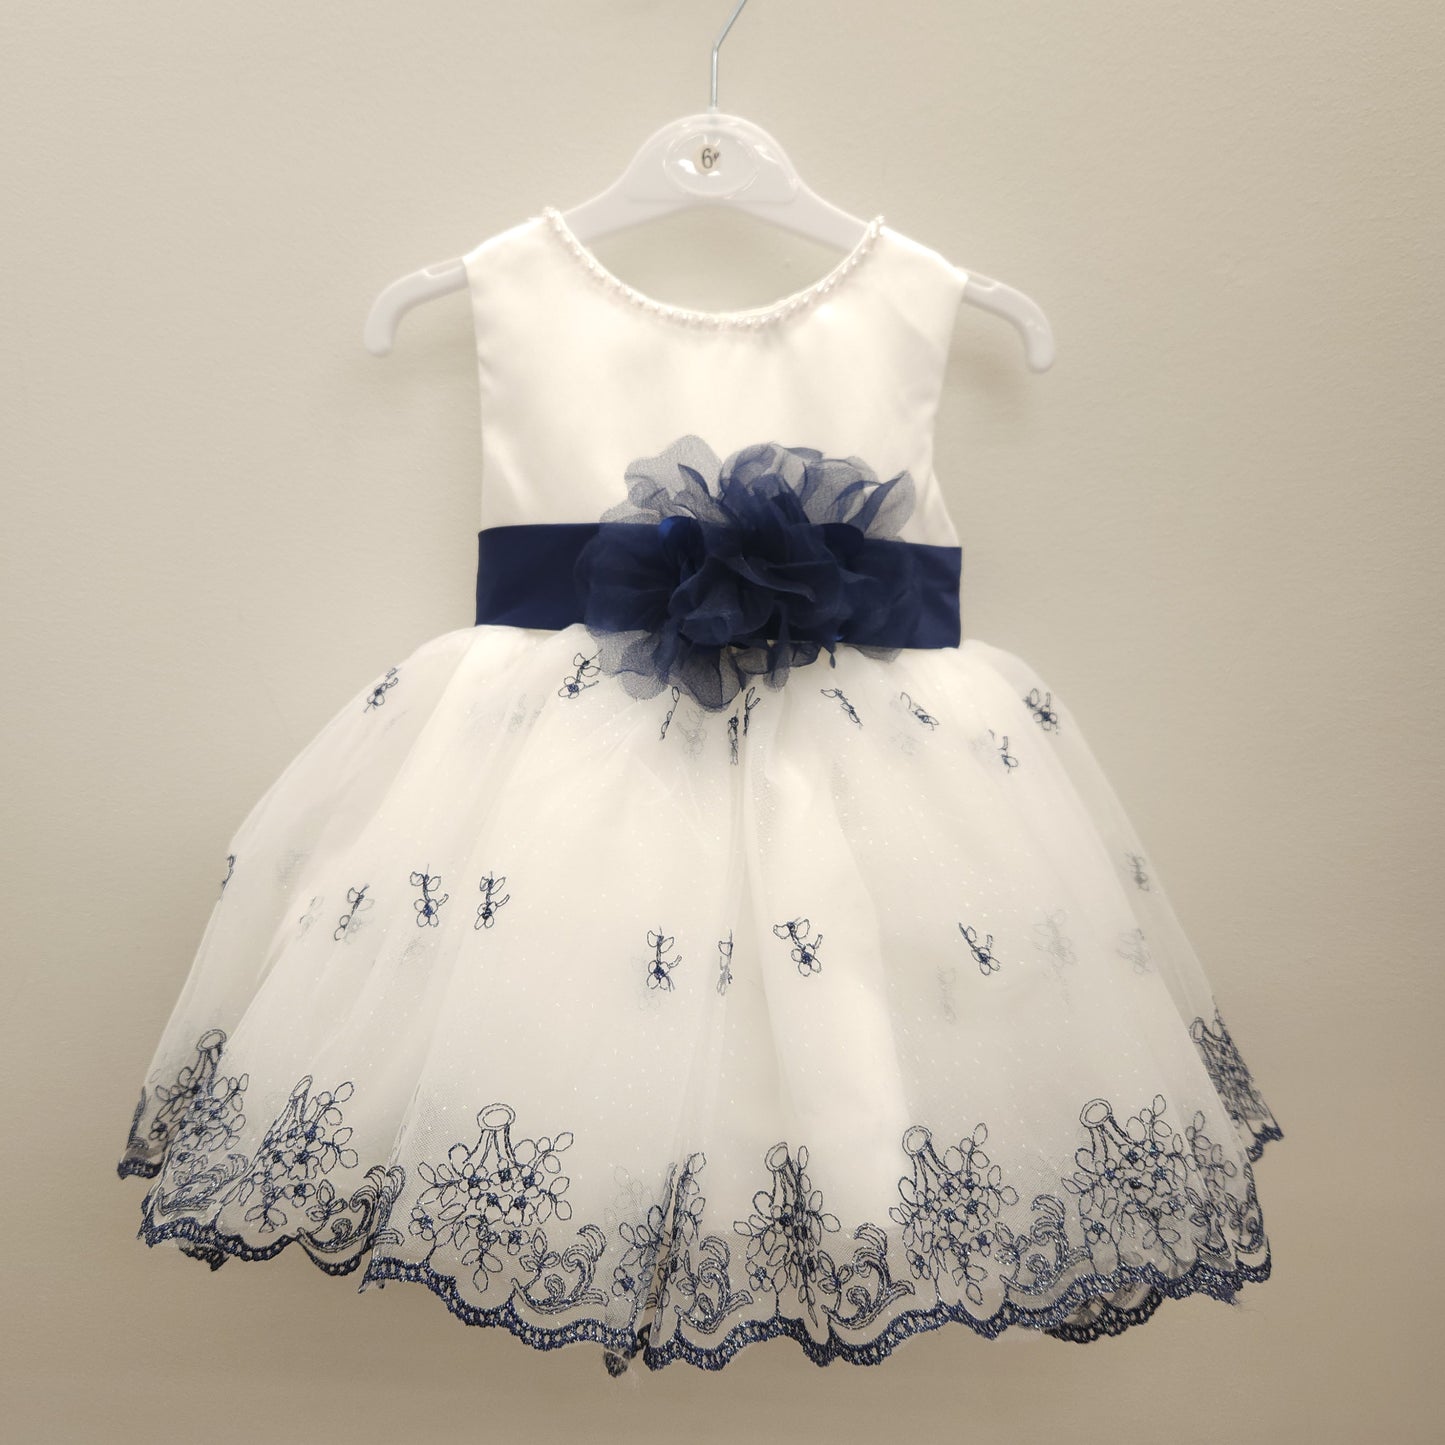 Chiffon flower with floral embroidery navy dress